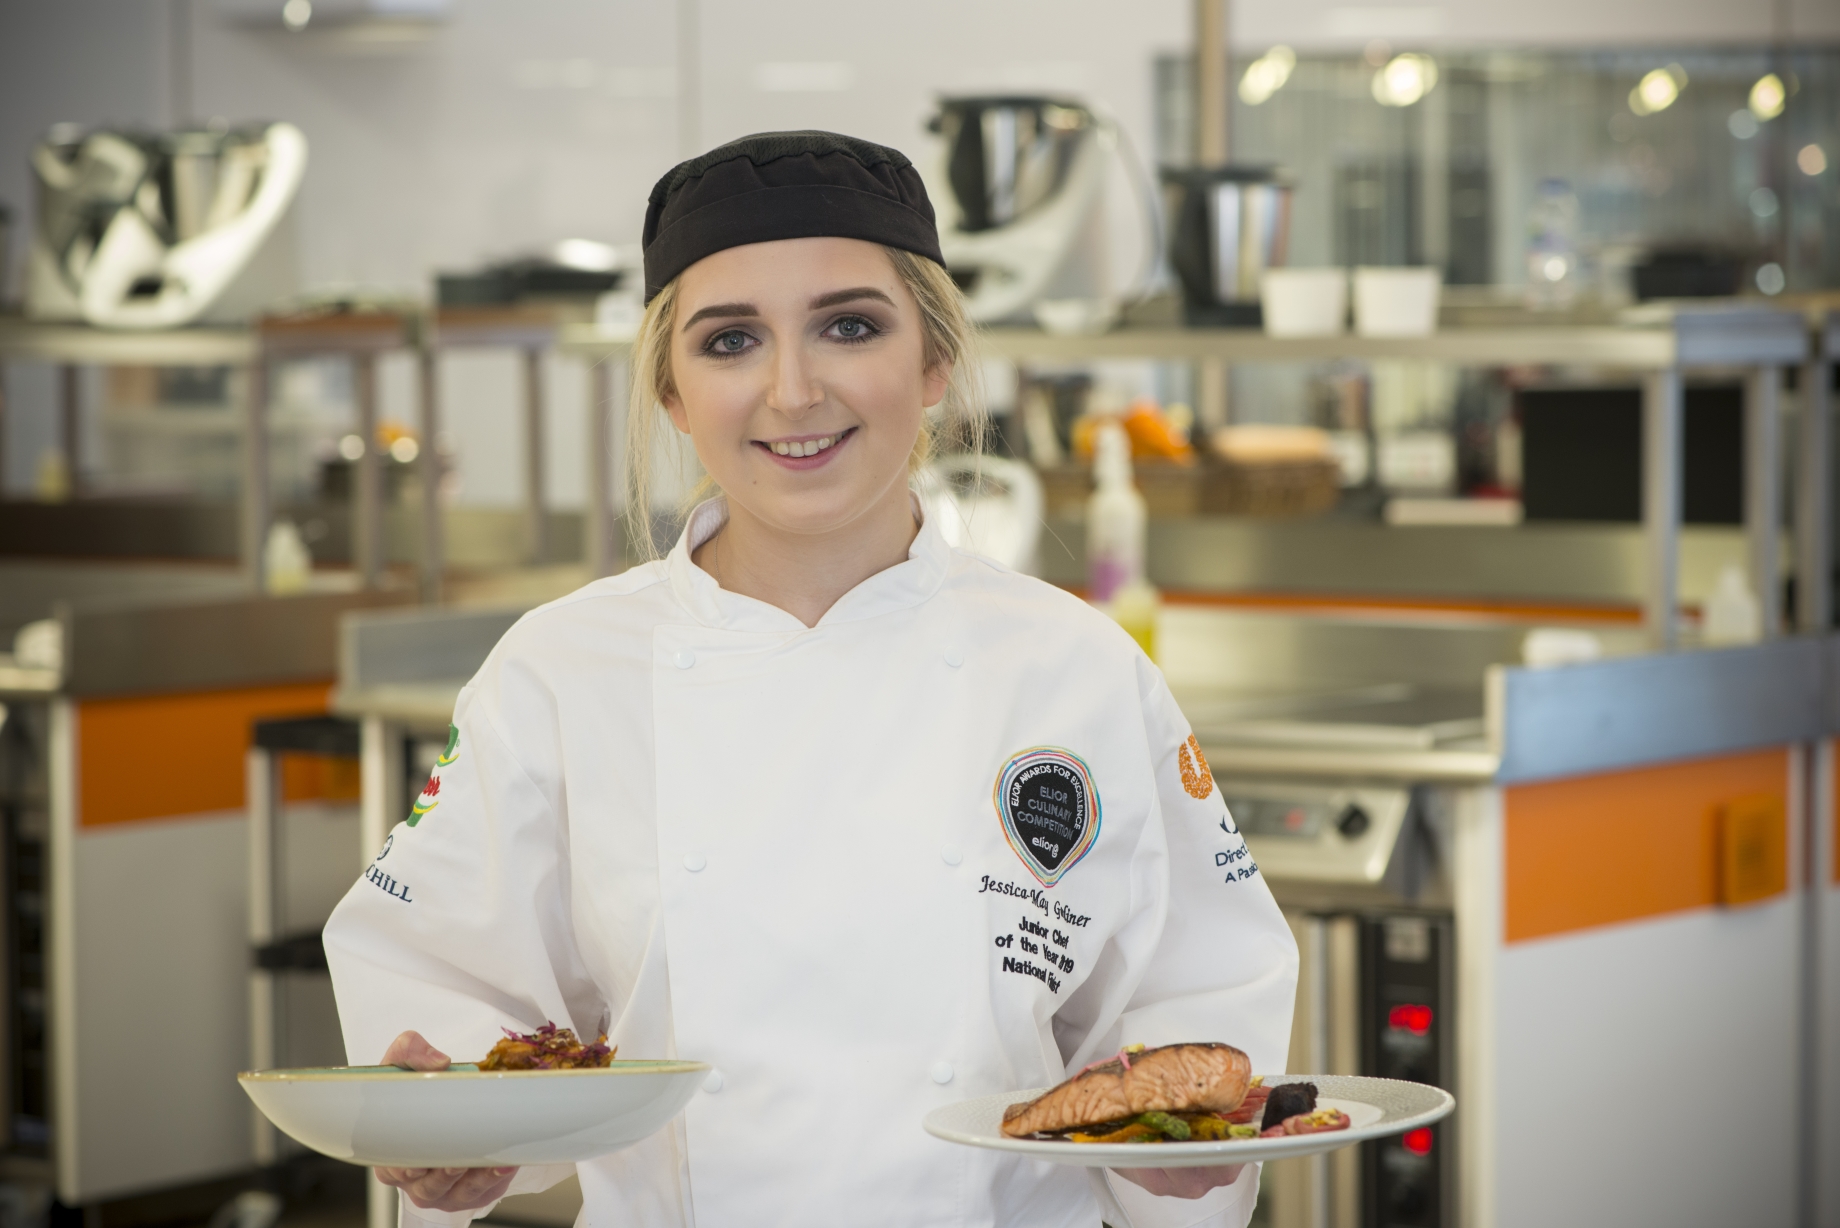 Photo of Jessica-May Gardiner winner of the Elior Junior Chef of the Year competition